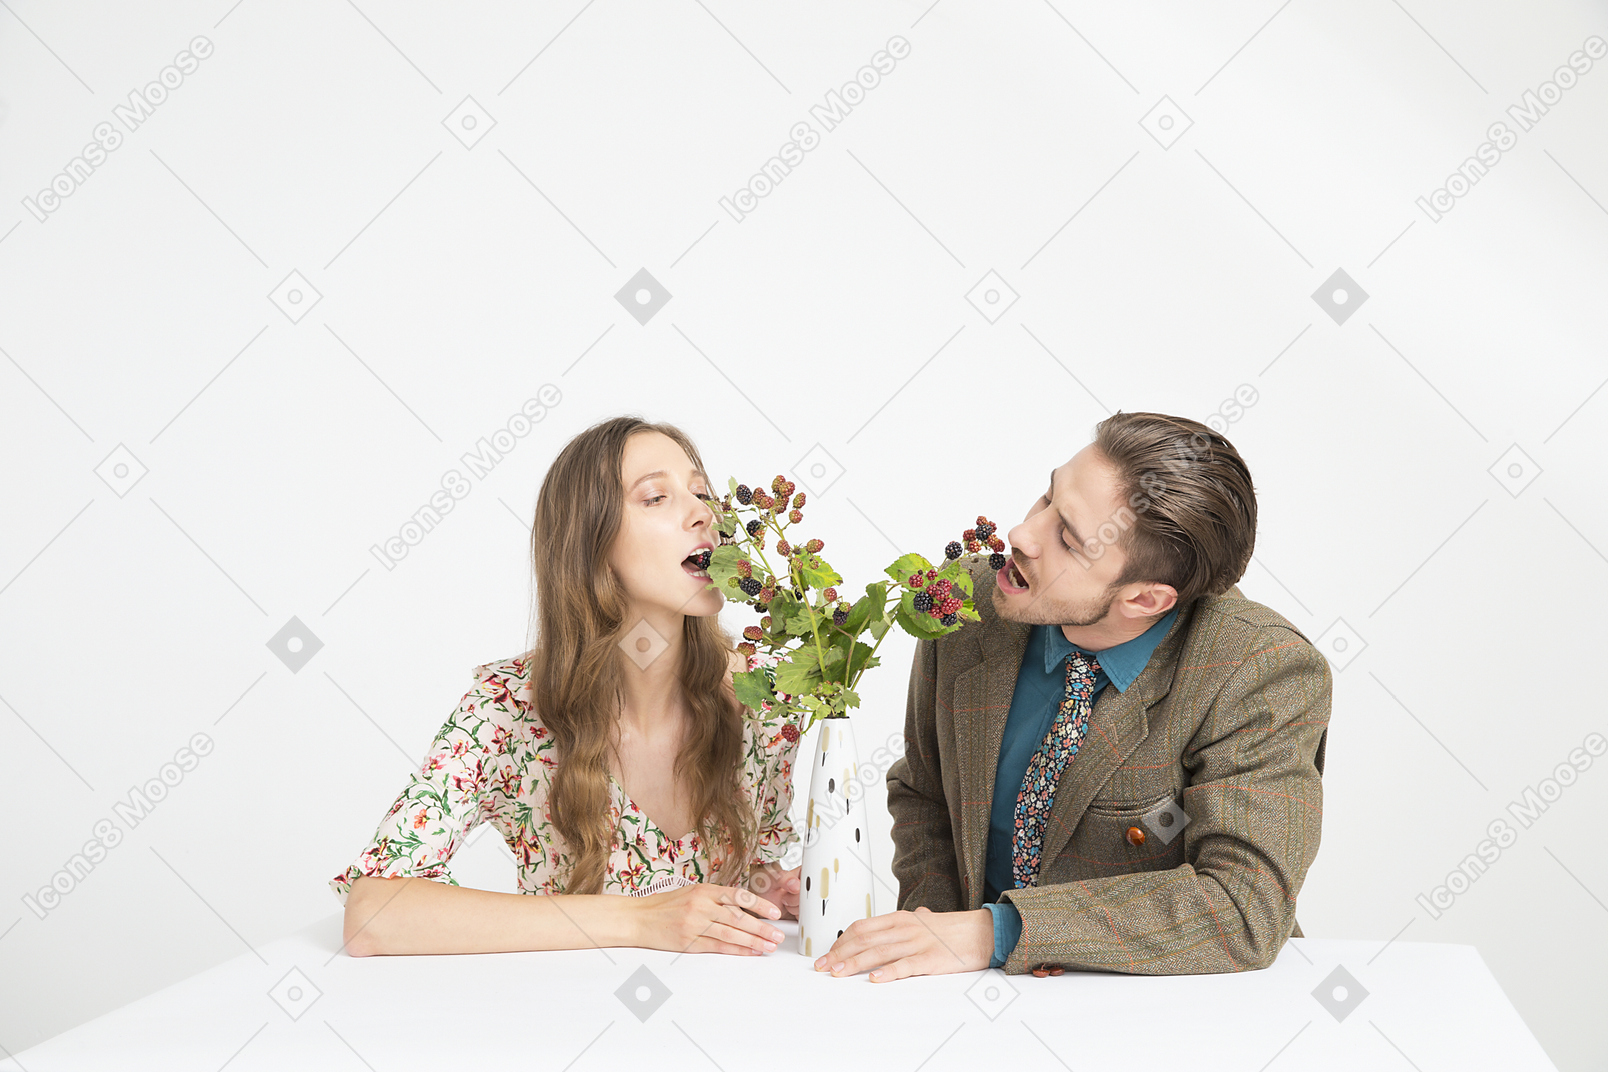 Couple sitting at the table and eating blackberries from the branches in vase